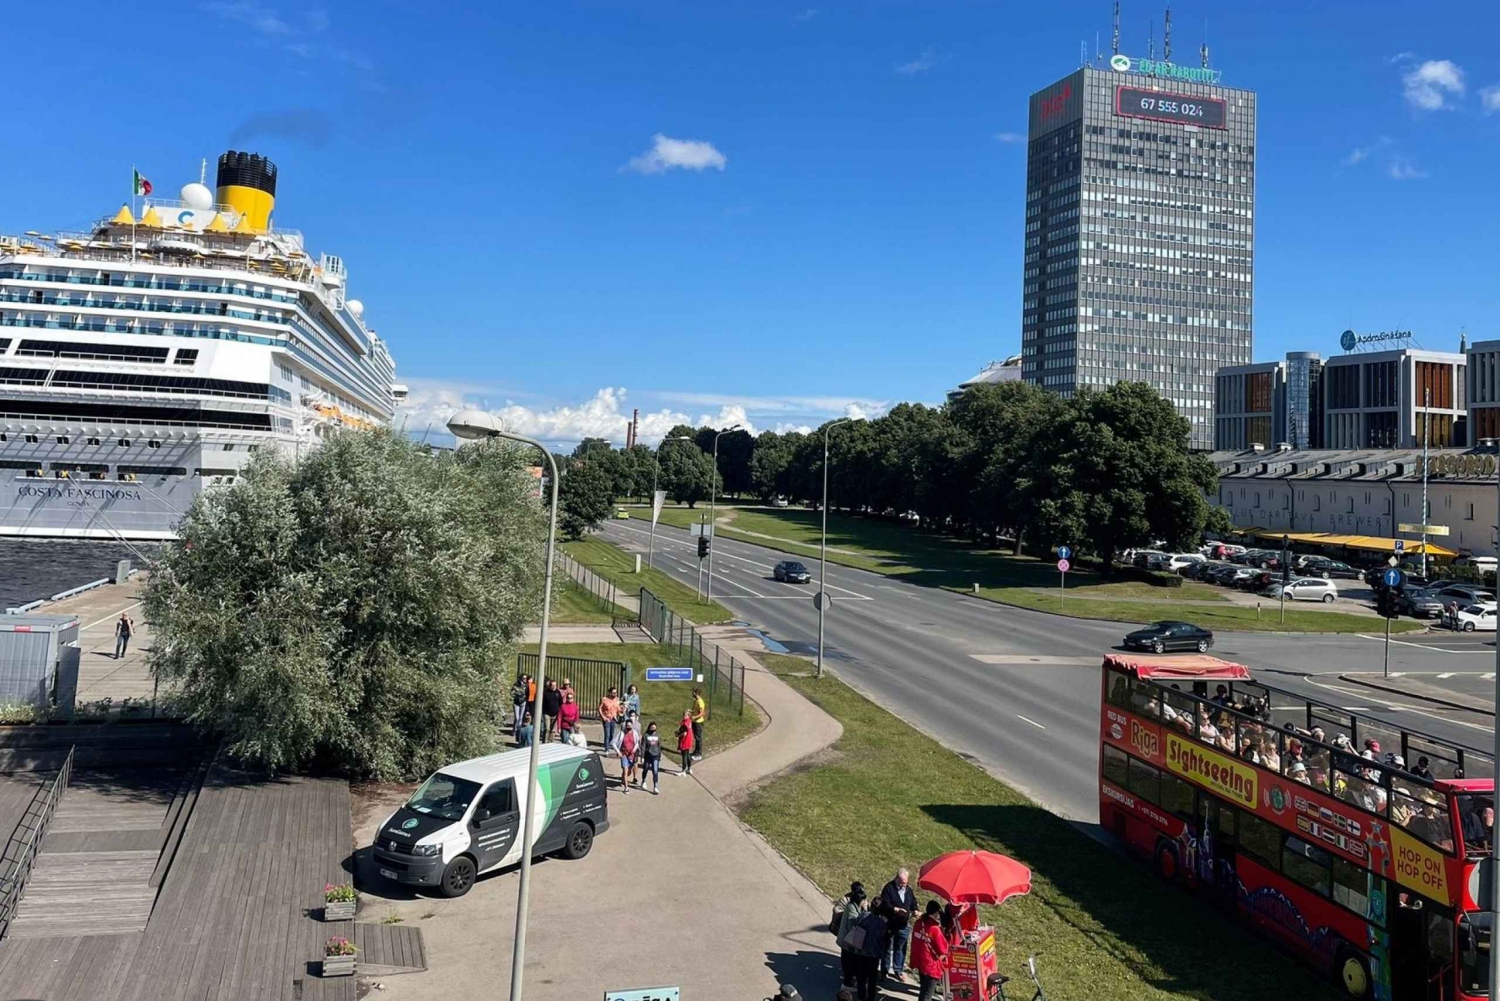 RigaGrandTour: Red Bus tour for cruise guests/Stadtrundfahrt